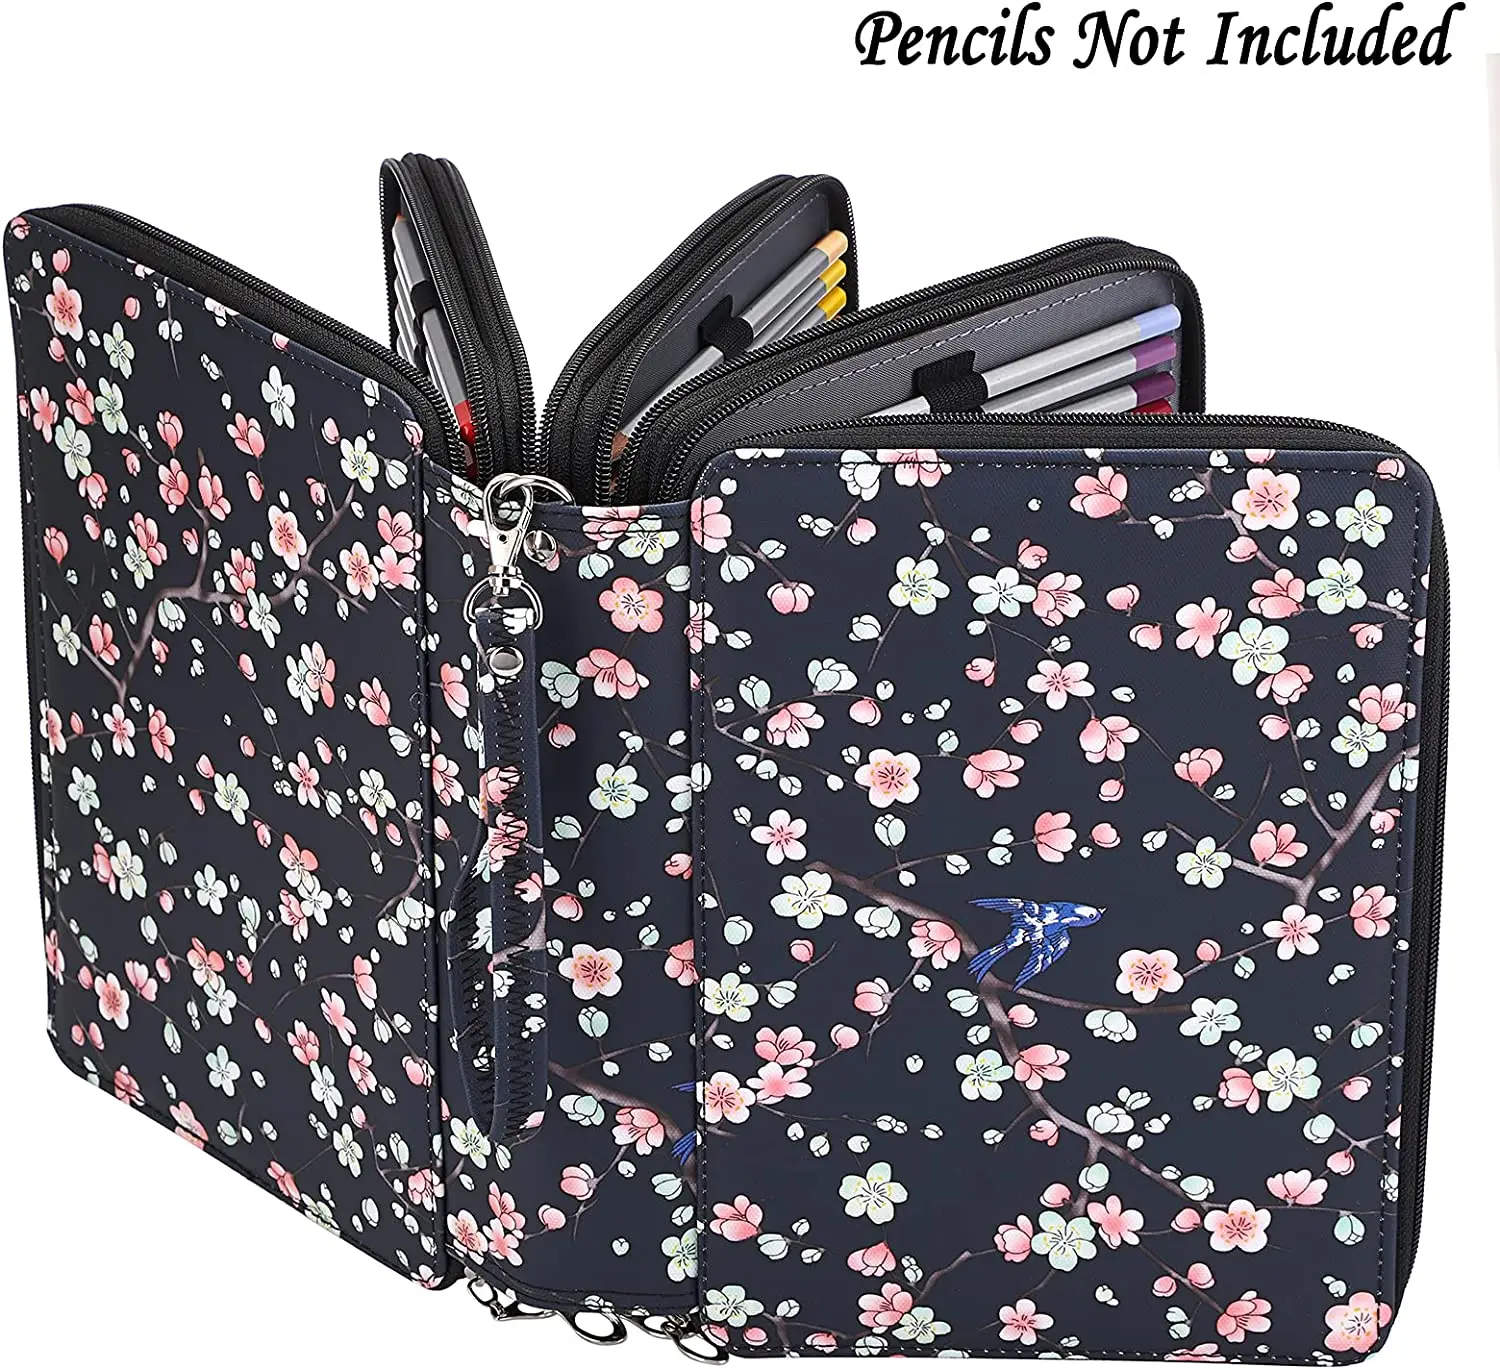 New Pencil Case 200 Slots Pencil Holder Pen Bag Large Capacity Pencil  Organizer Colored Pencil Box with Printing Pattern Flower - AliExpress